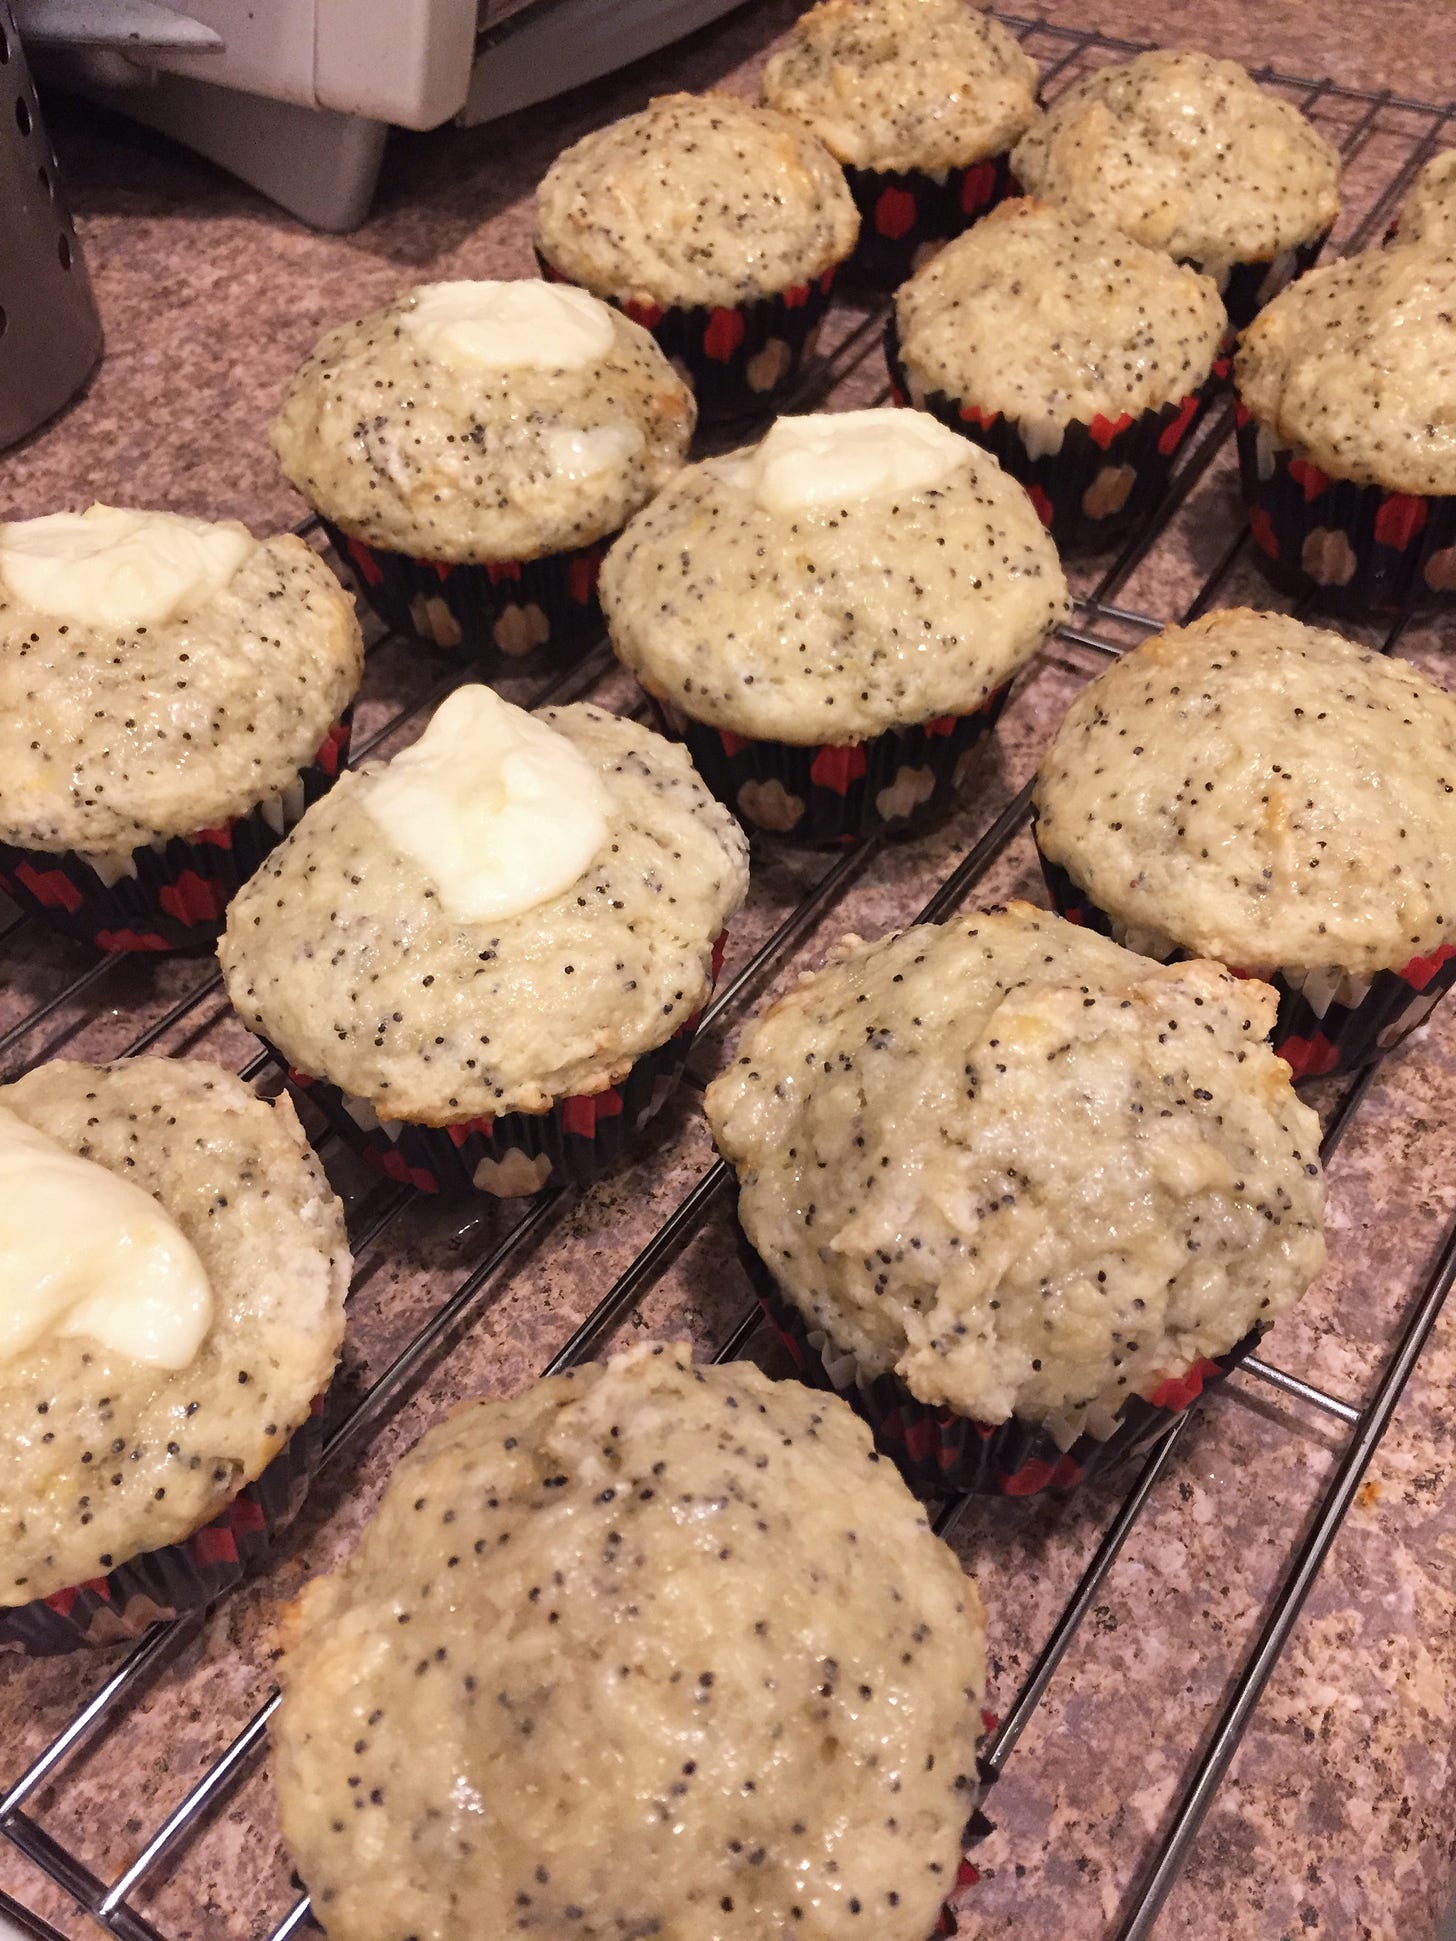 Lemon muffins, some in the foreground with blobs of mascarpone on top, dotted with poppyseeds sit on a cooling rack.